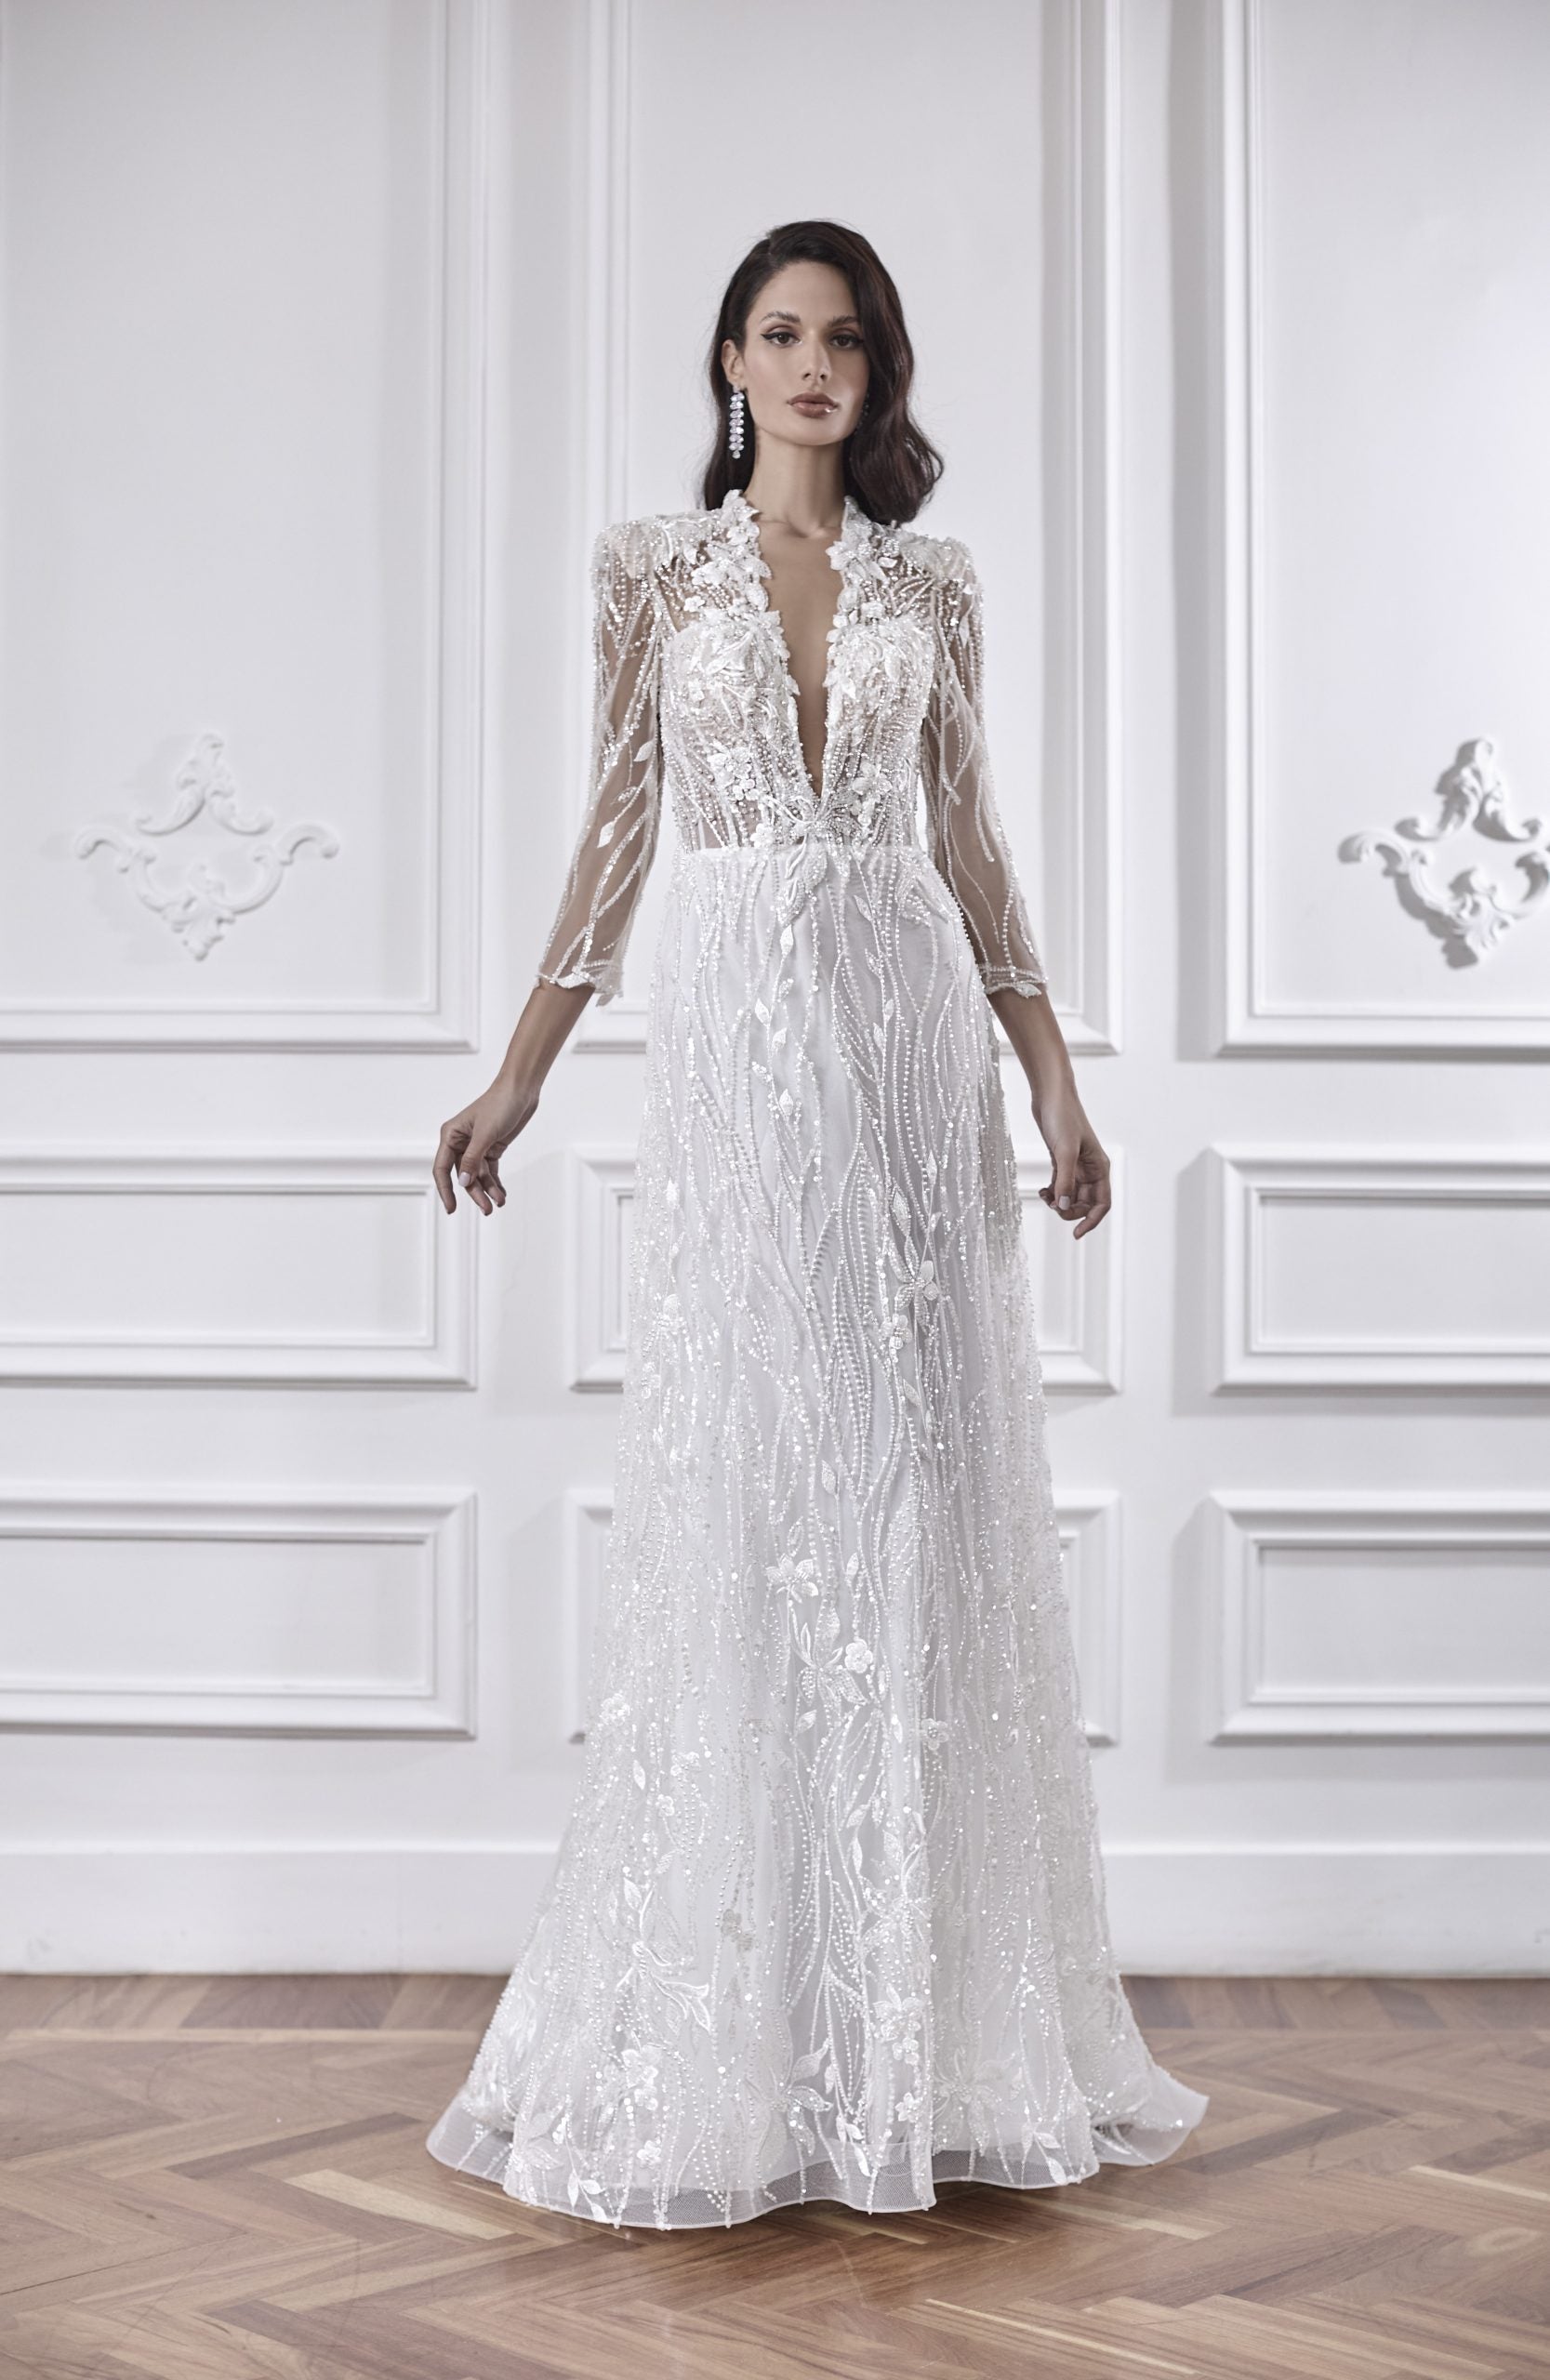 Beaded A-line Wedding Dress With Deep V-neckline And Illusion Long Sleeves by Maison Signore